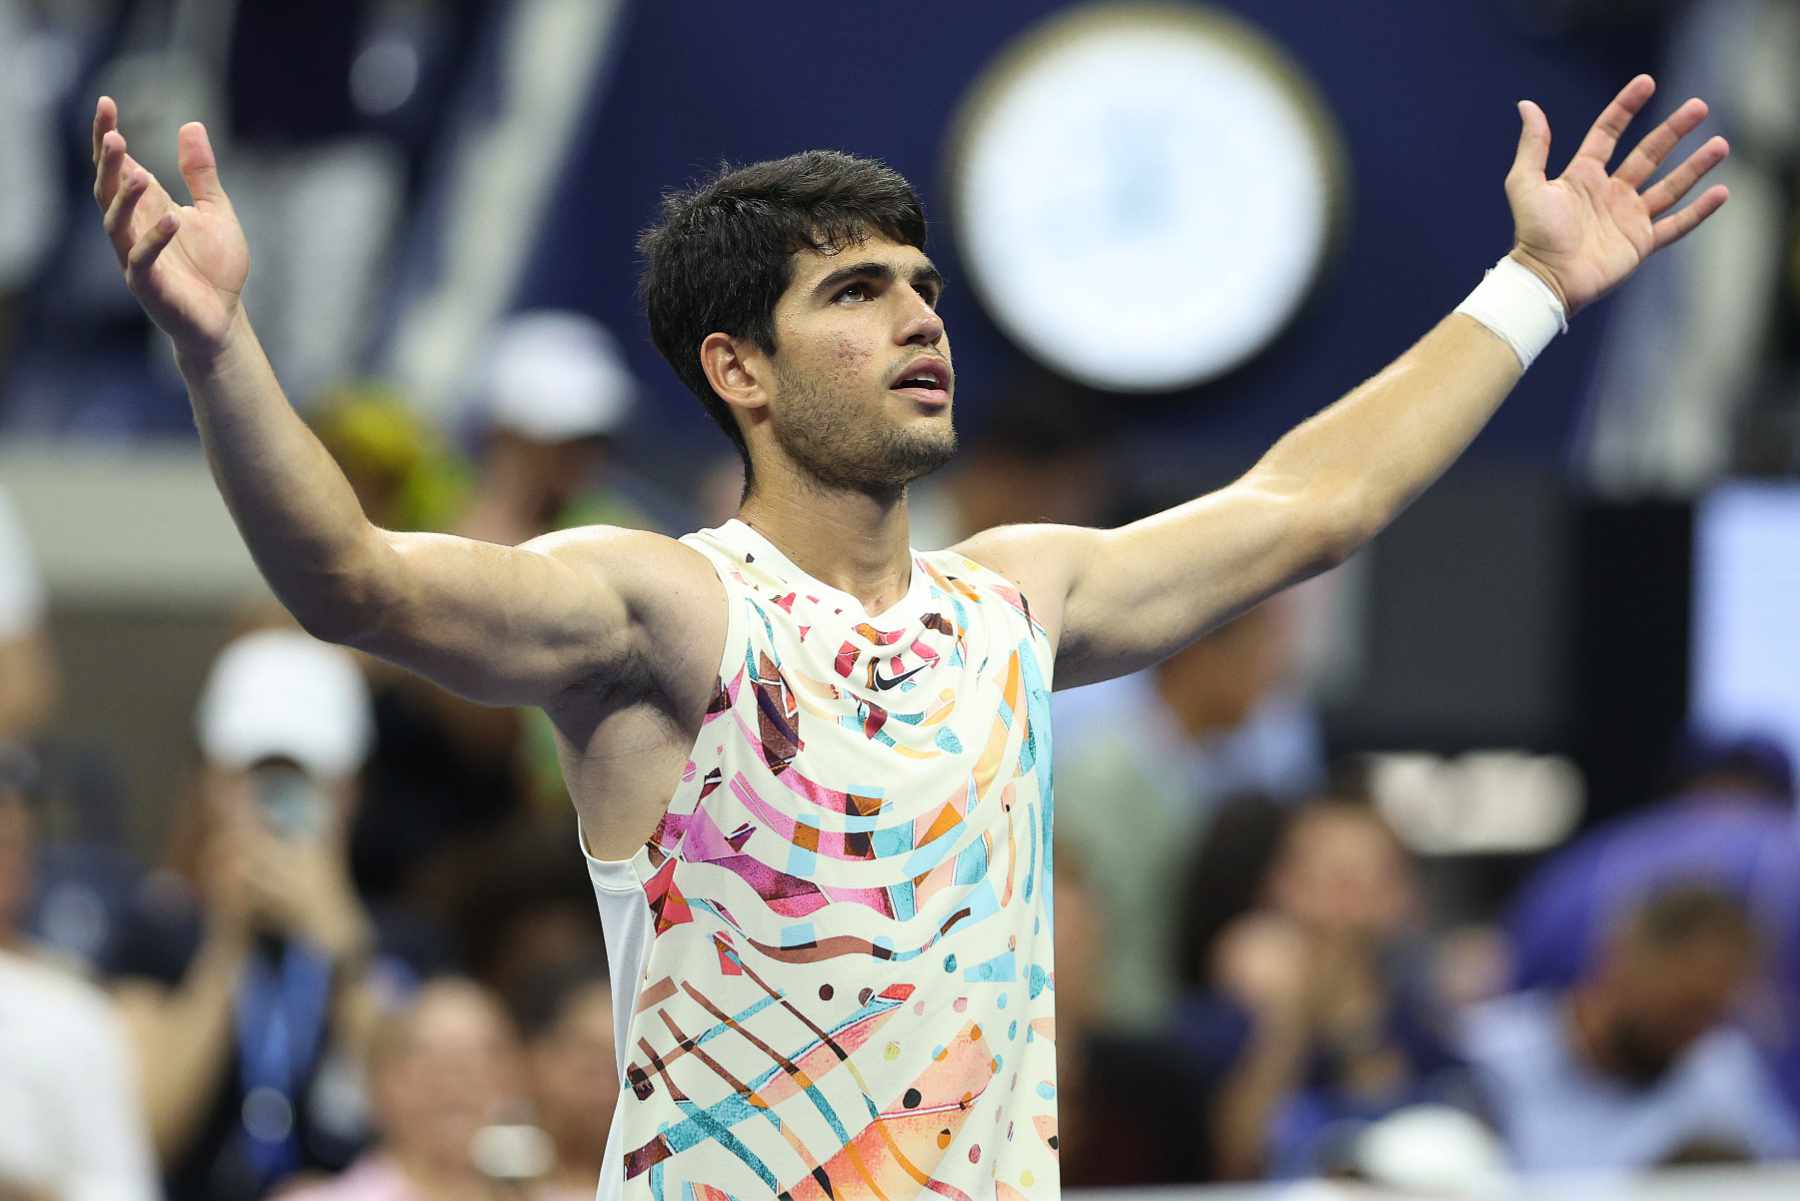 Carlos Alcaraz wears a sleeveless T-shirt during a tennis match at the 2023 US Open